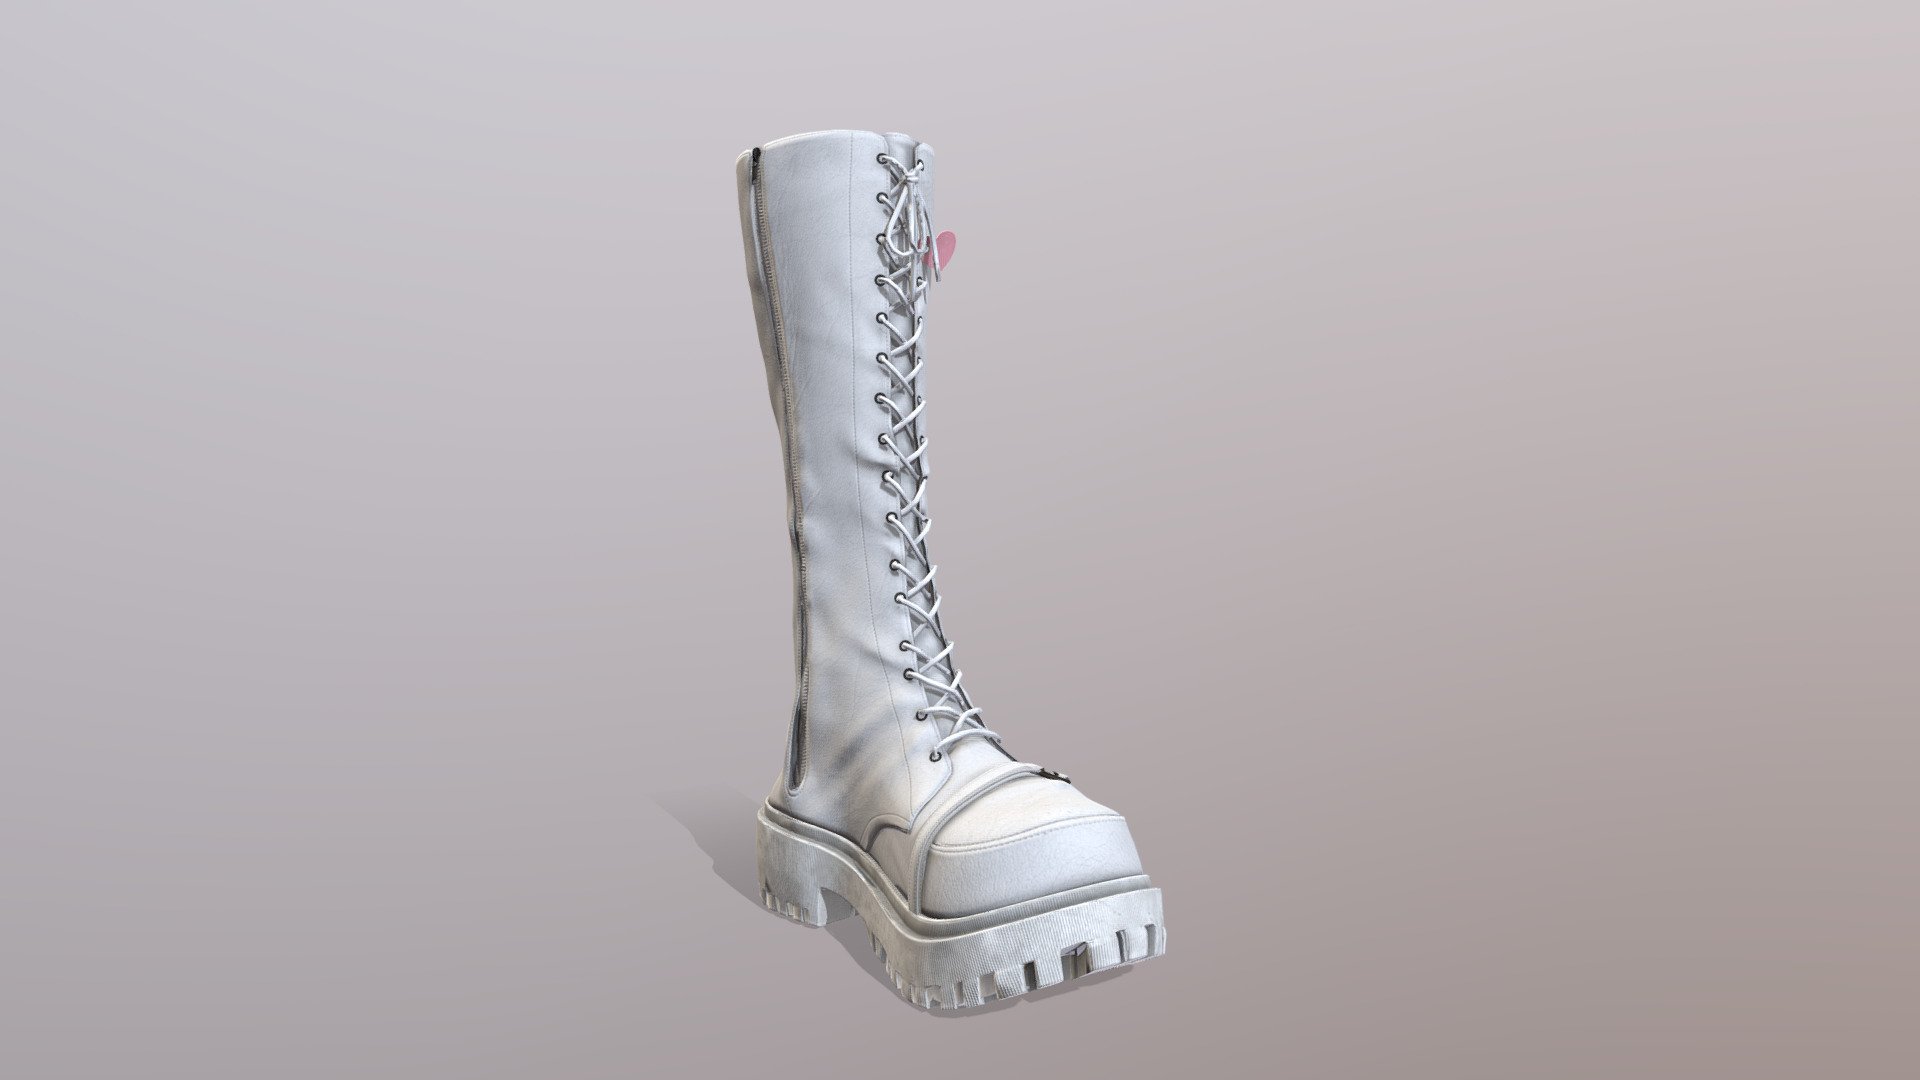 .blend (3.6.5) fomat
↪ 1 material
↪ 3 texture (8192*8192, jpg)

Additional file Include HighPoly and High resolution .blend fomat model - White Leather Boots - Buy Royalty Free 3D model by SUSUSUBE 3d model